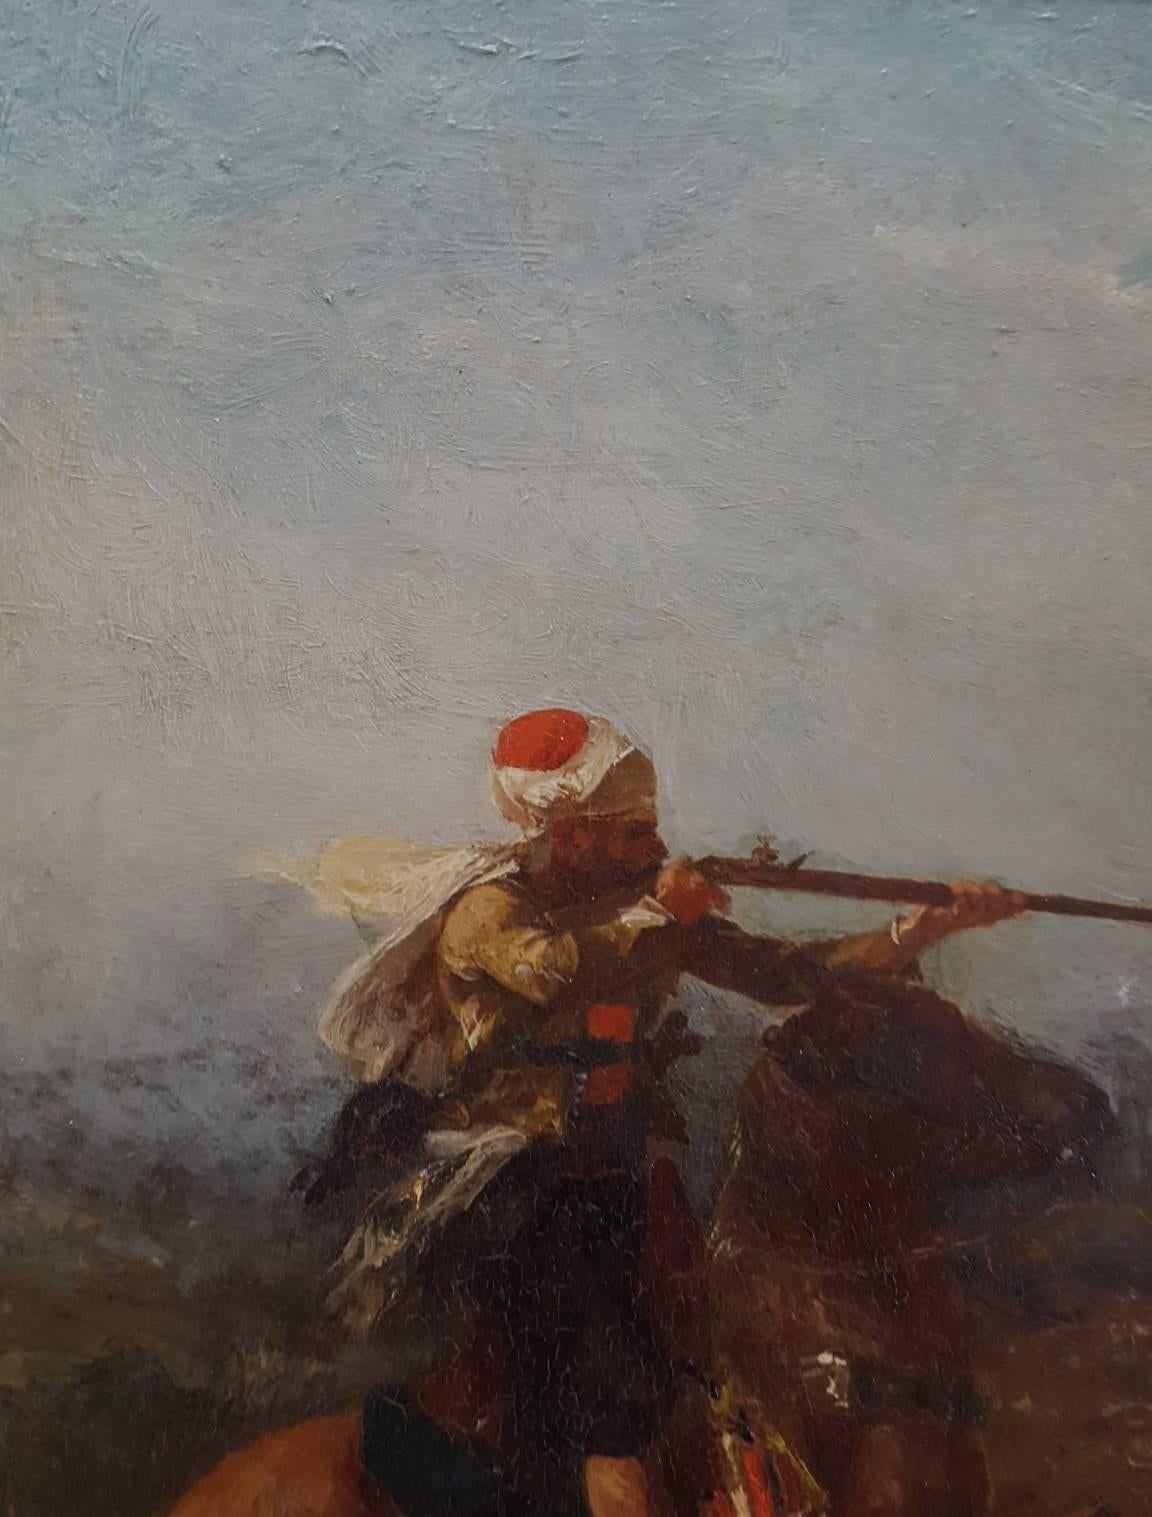 An original signed oil on board by French artist Georges Washington (1827-1901) titled "Cavaliers Algériens au Combat", c. 1879. Hand signed by Washington lower left "G. Washington". A very desirable painting by the famous